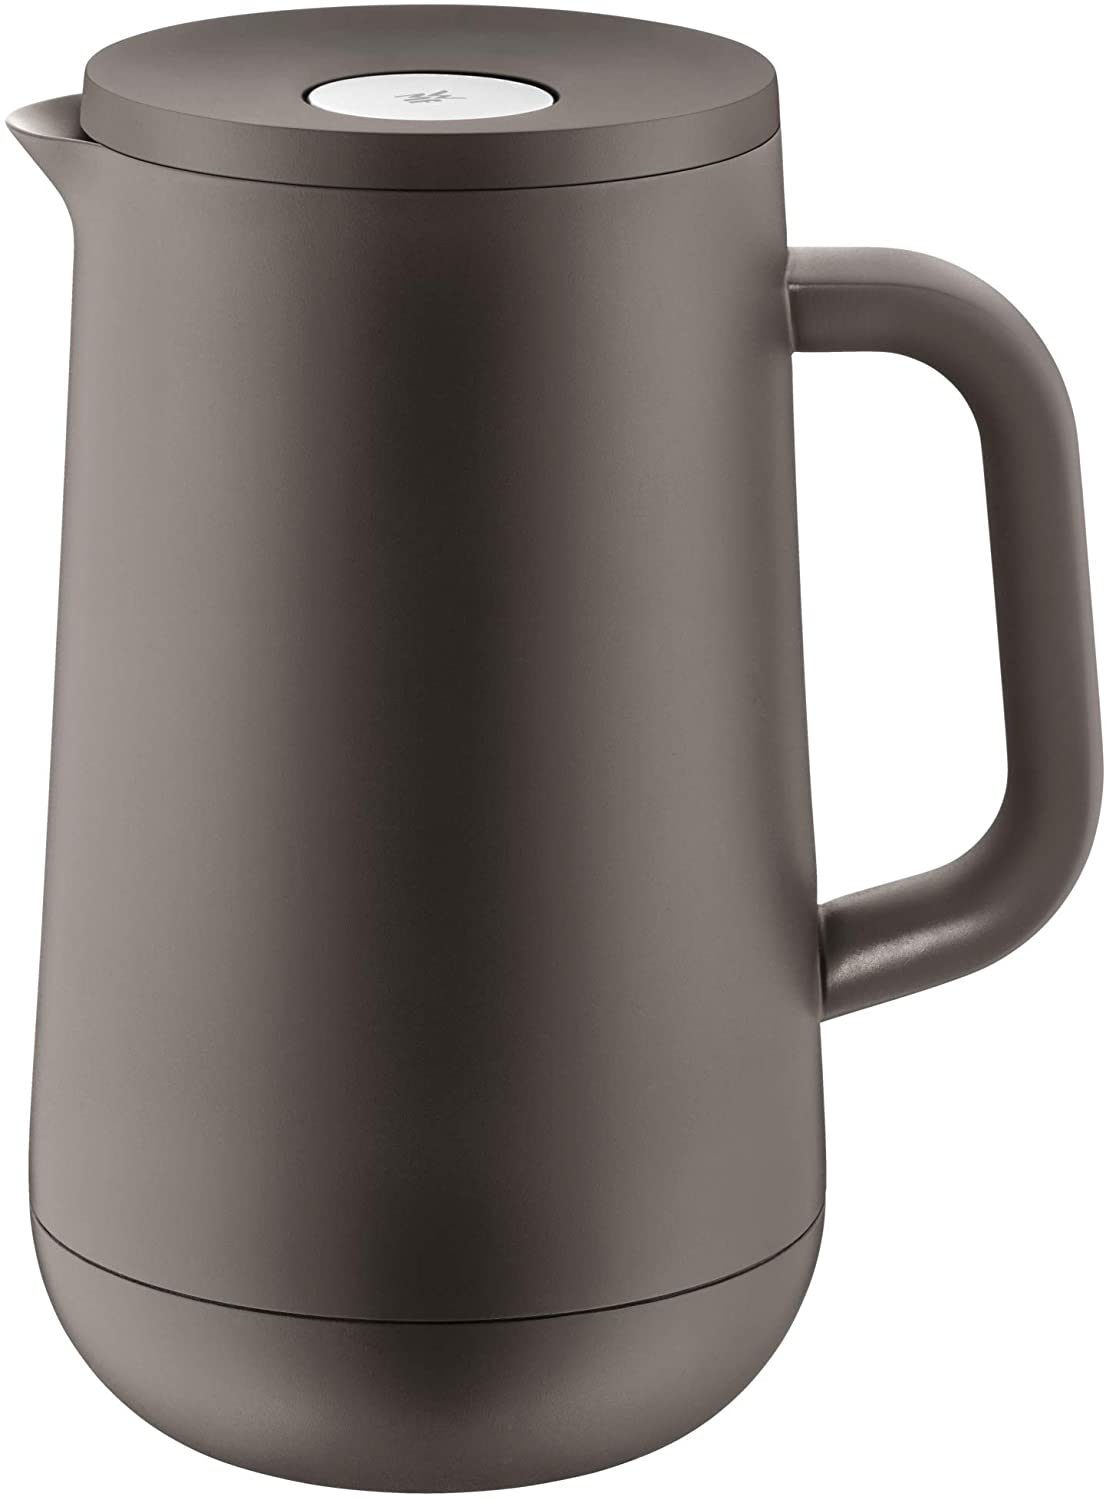 WMF Impulse thermos jug 1l, vacuum jug for tea or coffee, pressure lock, keeps drinks cold & warm for 24 hours, light brown